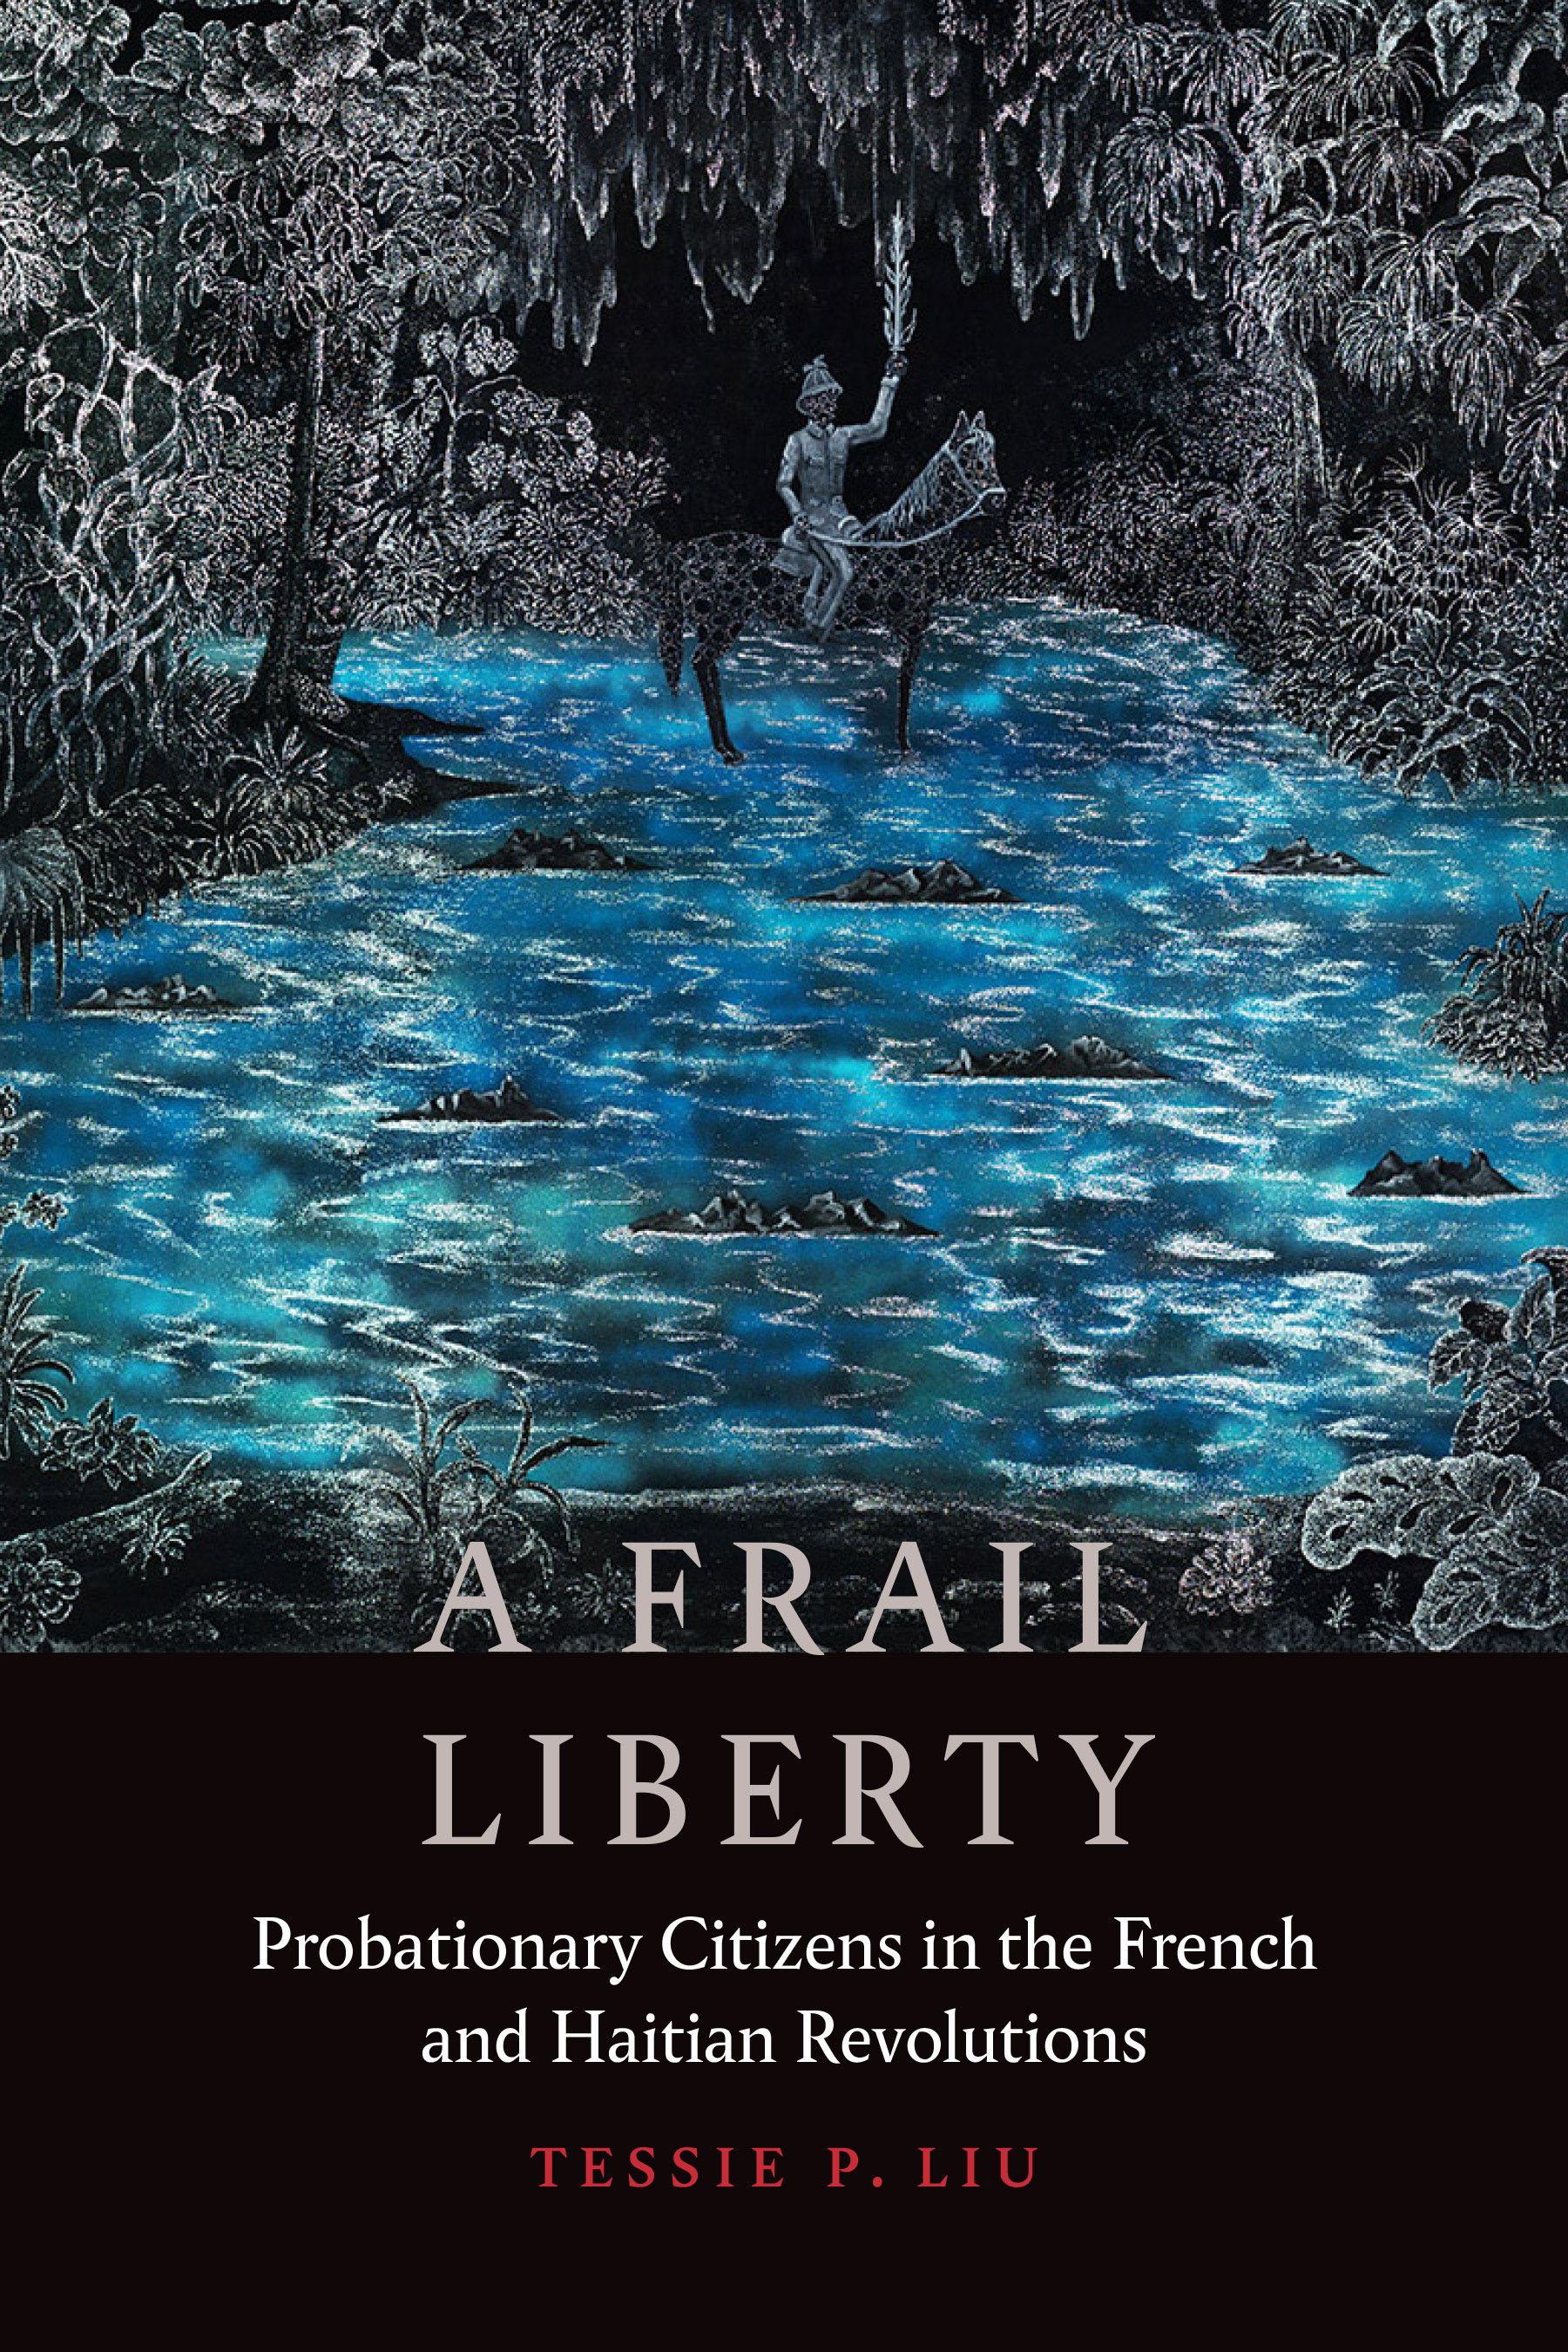 A Frail Liberty: Probationary Citizens in the French and Haitian Revolutions